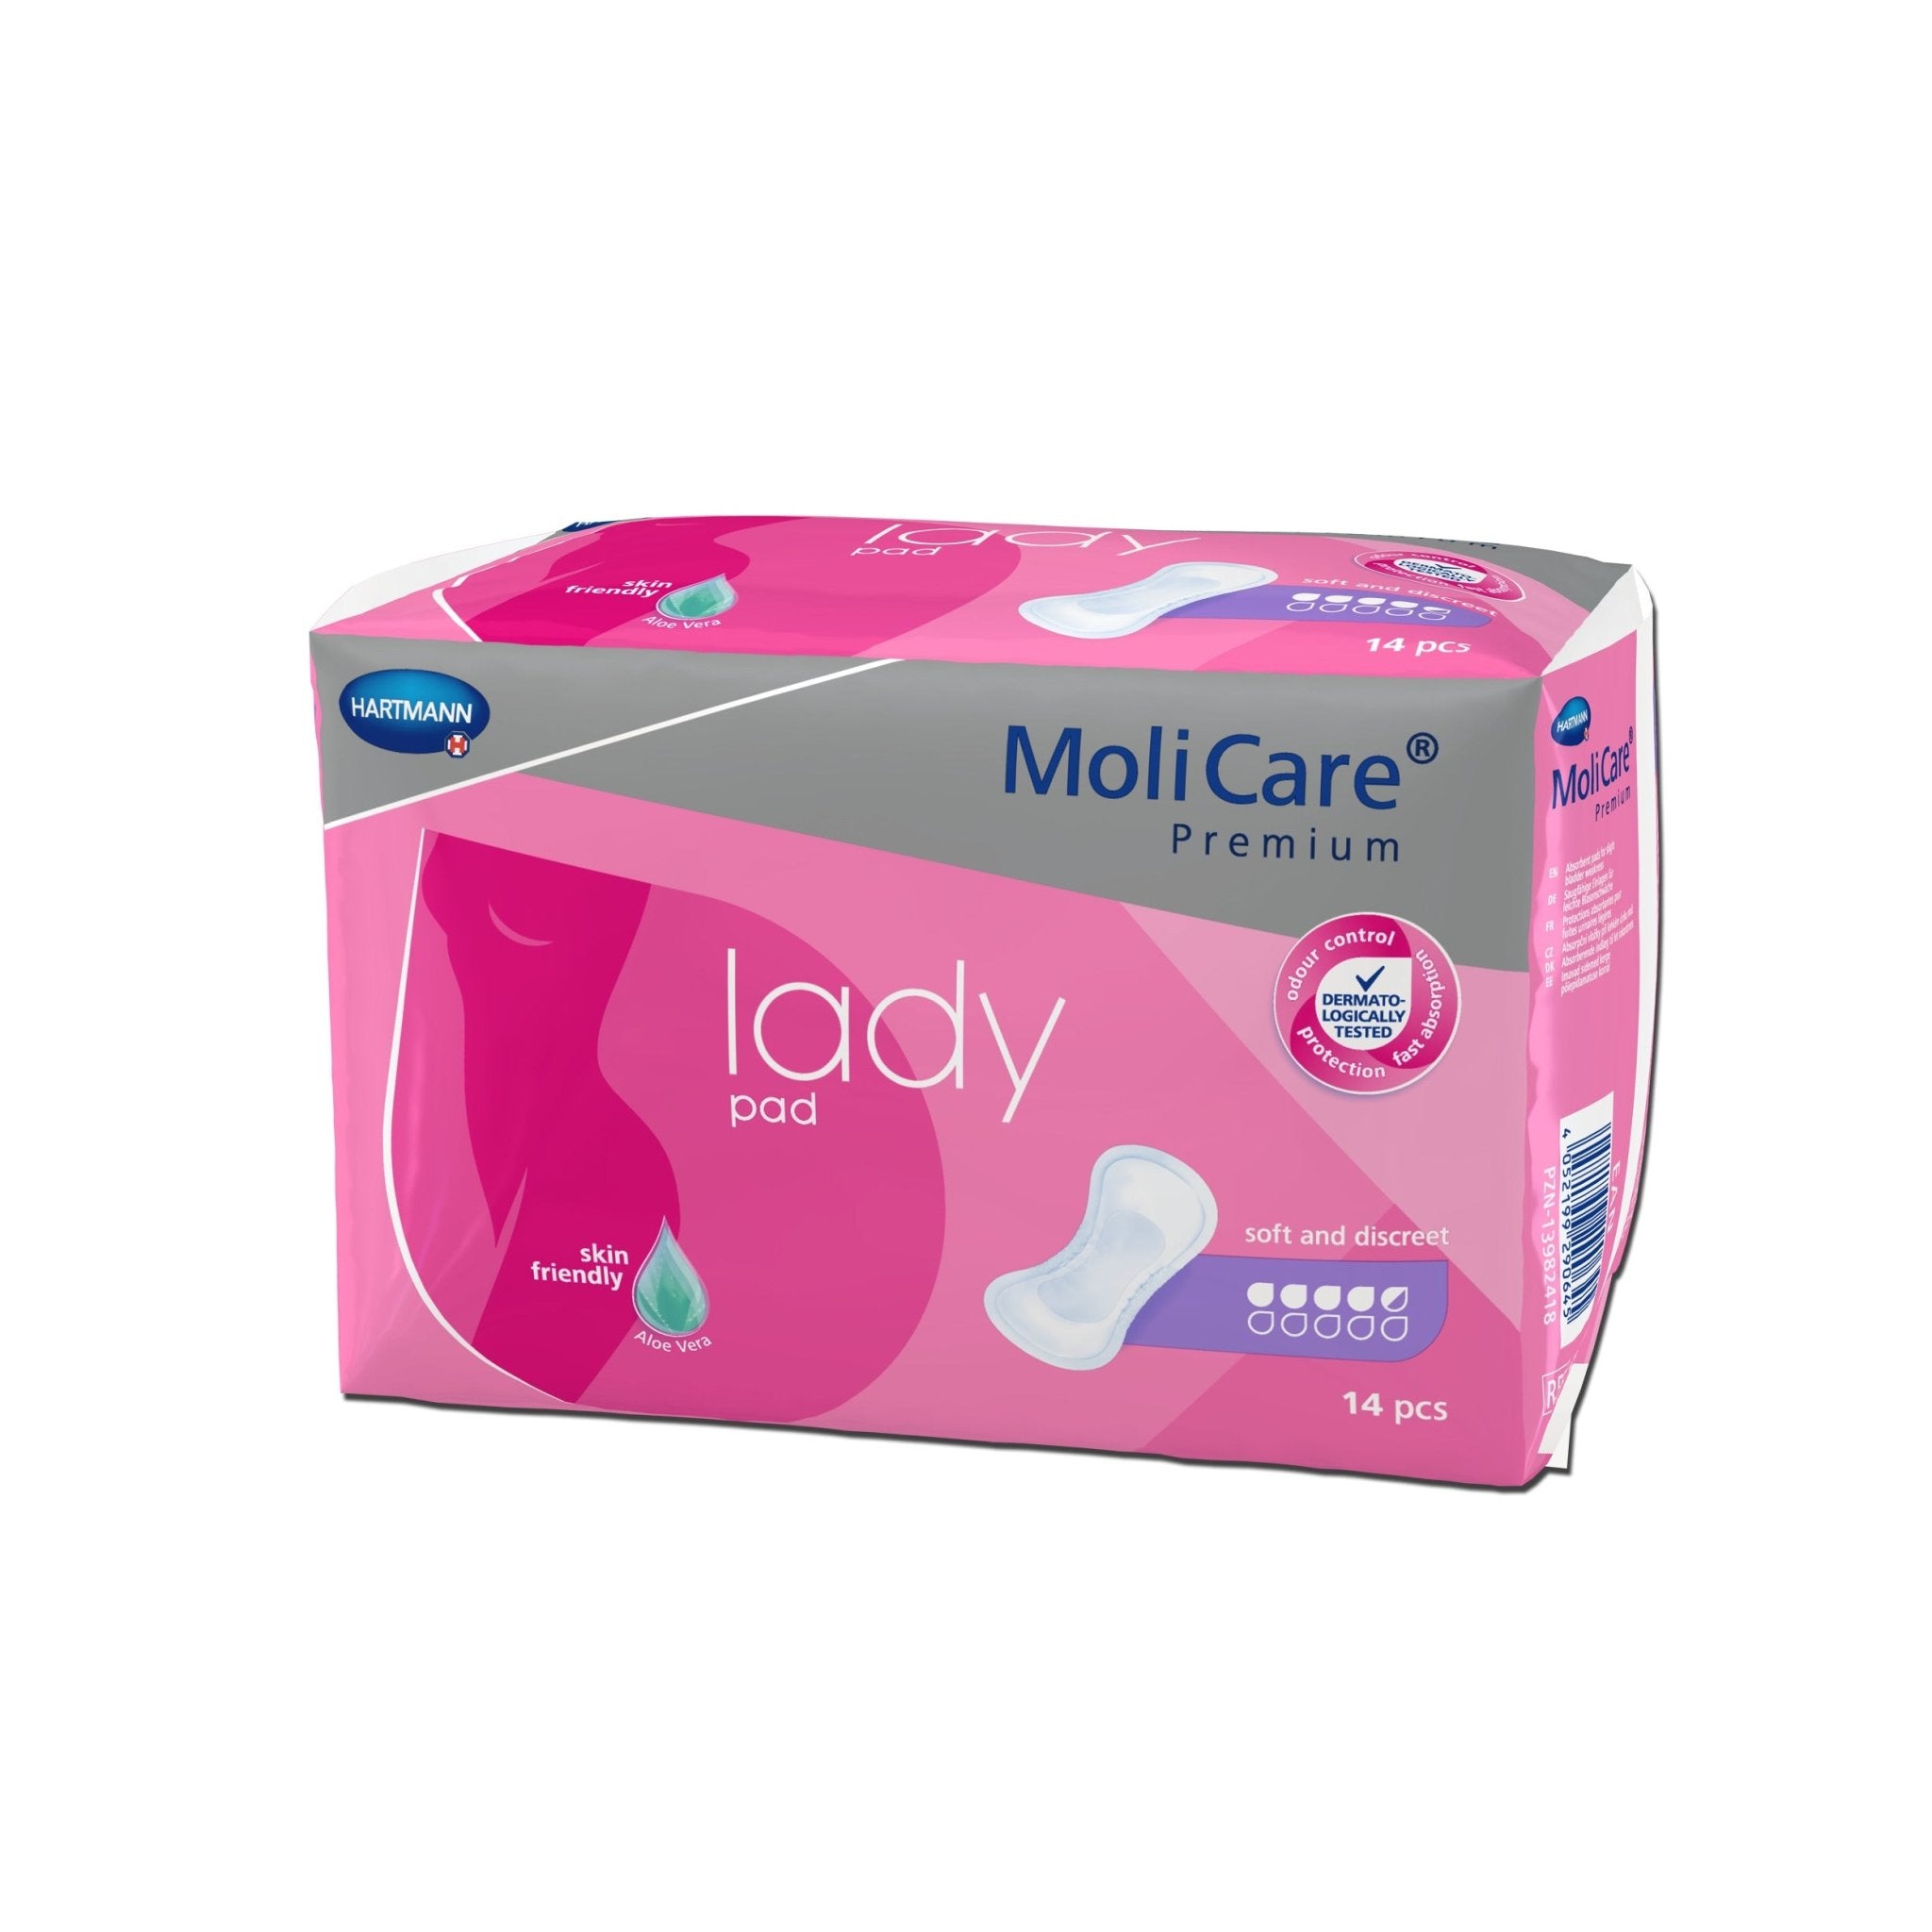 PK/14 - MoliCare Premium Lady Pad, 4.5 Drop Absorbency Level, 17" x 6.5", Non-woven, Latex-free. - Best Buy Medical Supplies